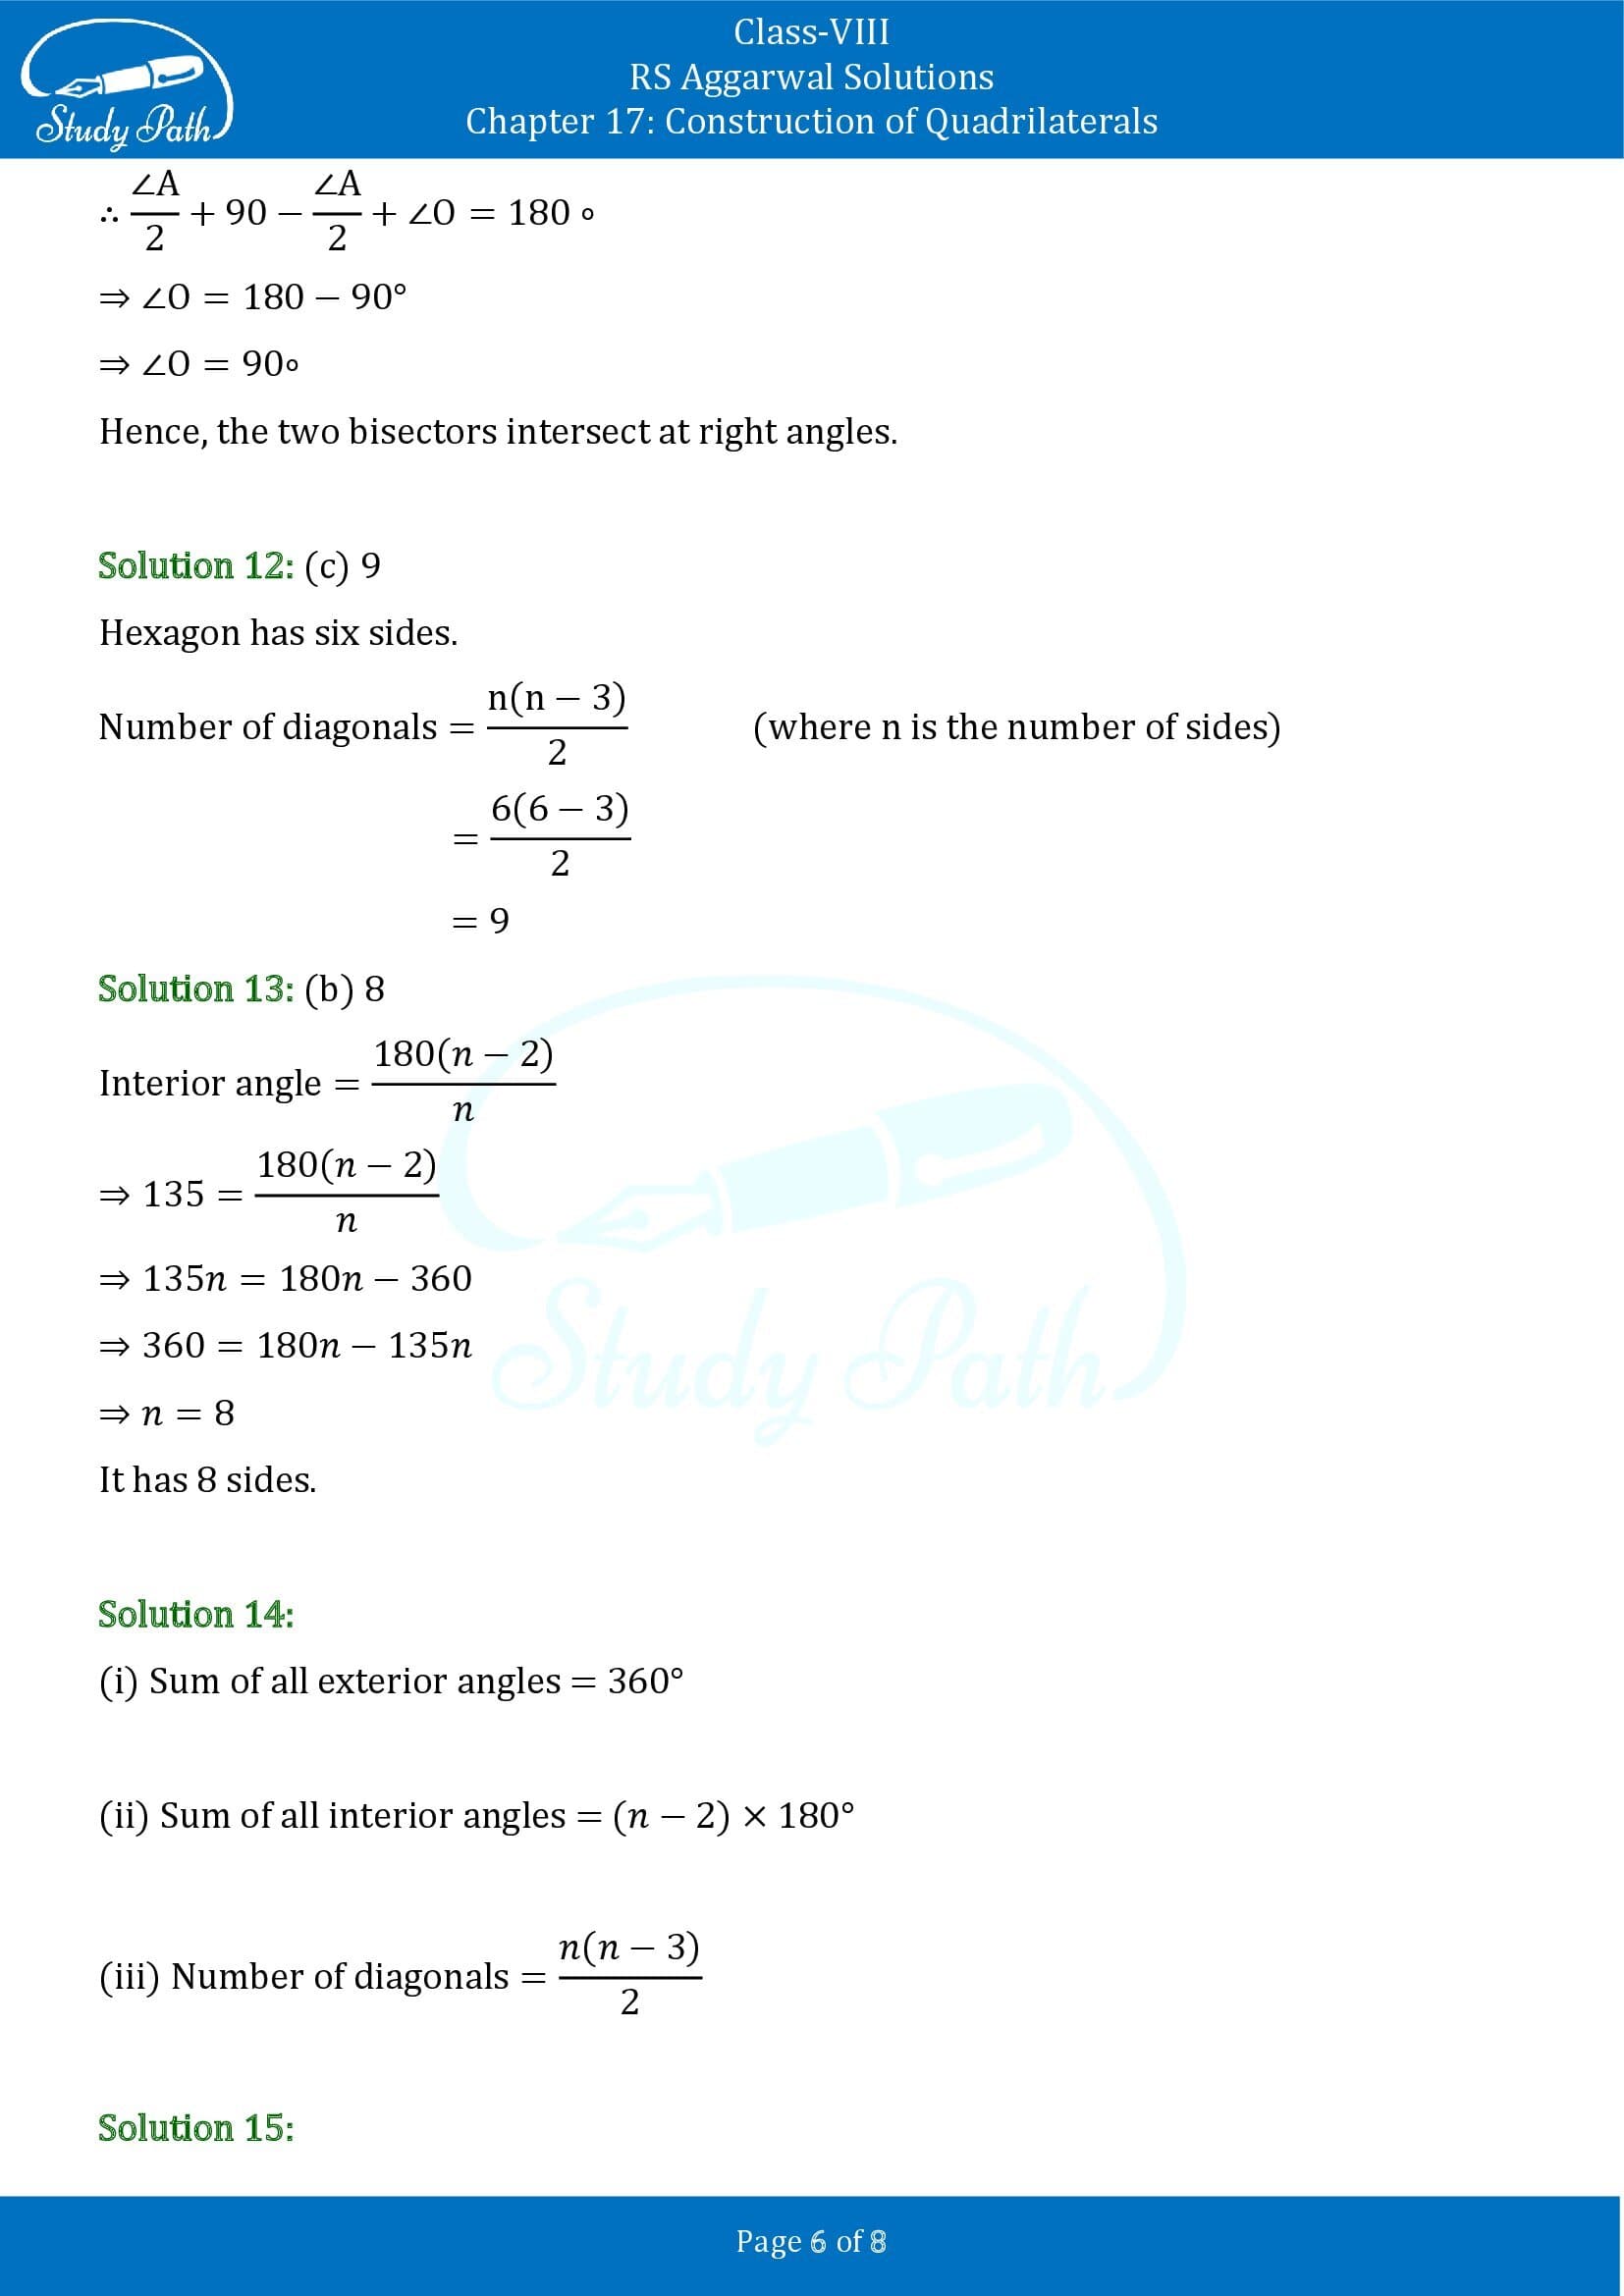 RS Aggarwal Solutions Class 8 Chapter 17 Construction of Quadrilaterals Test Paper 0006